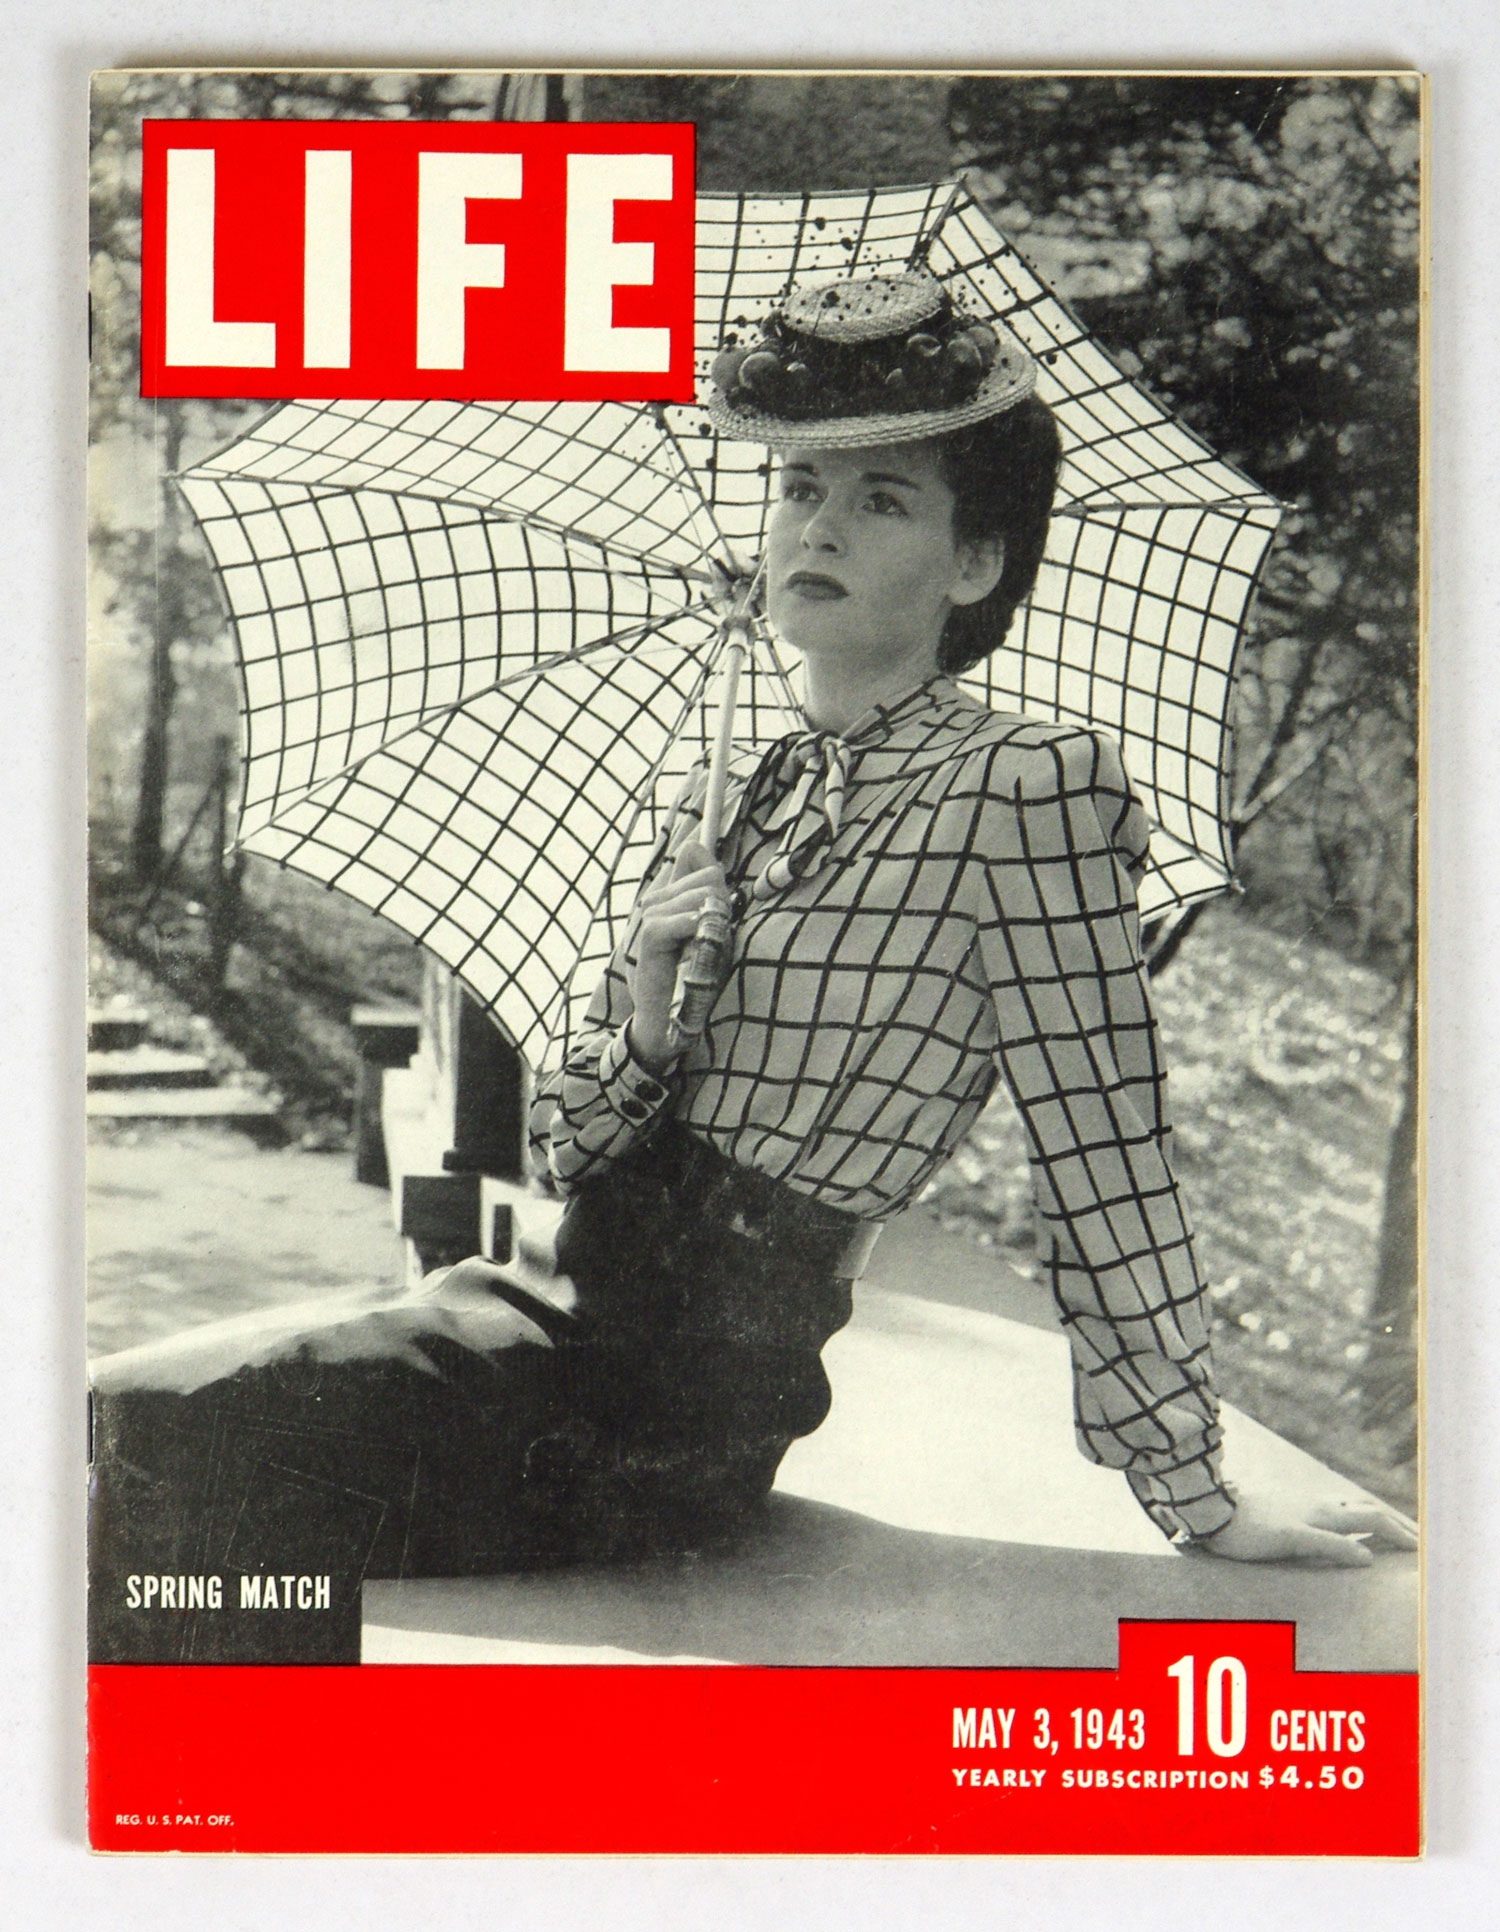 LIFE Magazine Back Issue 1943 May 3 Spring Match